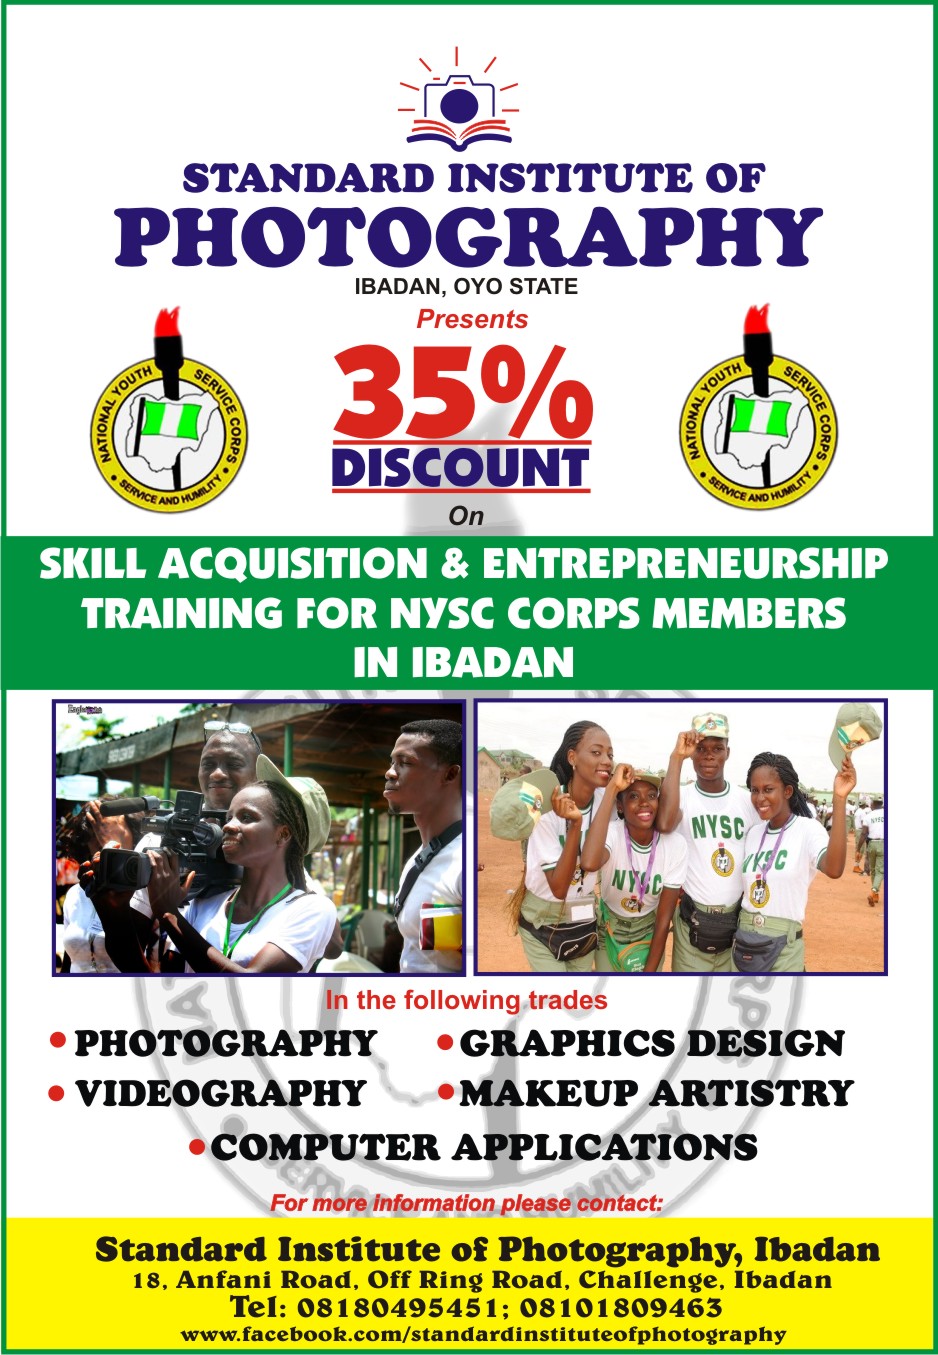 Skill acquisition and entrepreneurship training for NYSC CORPS members in Ibadan